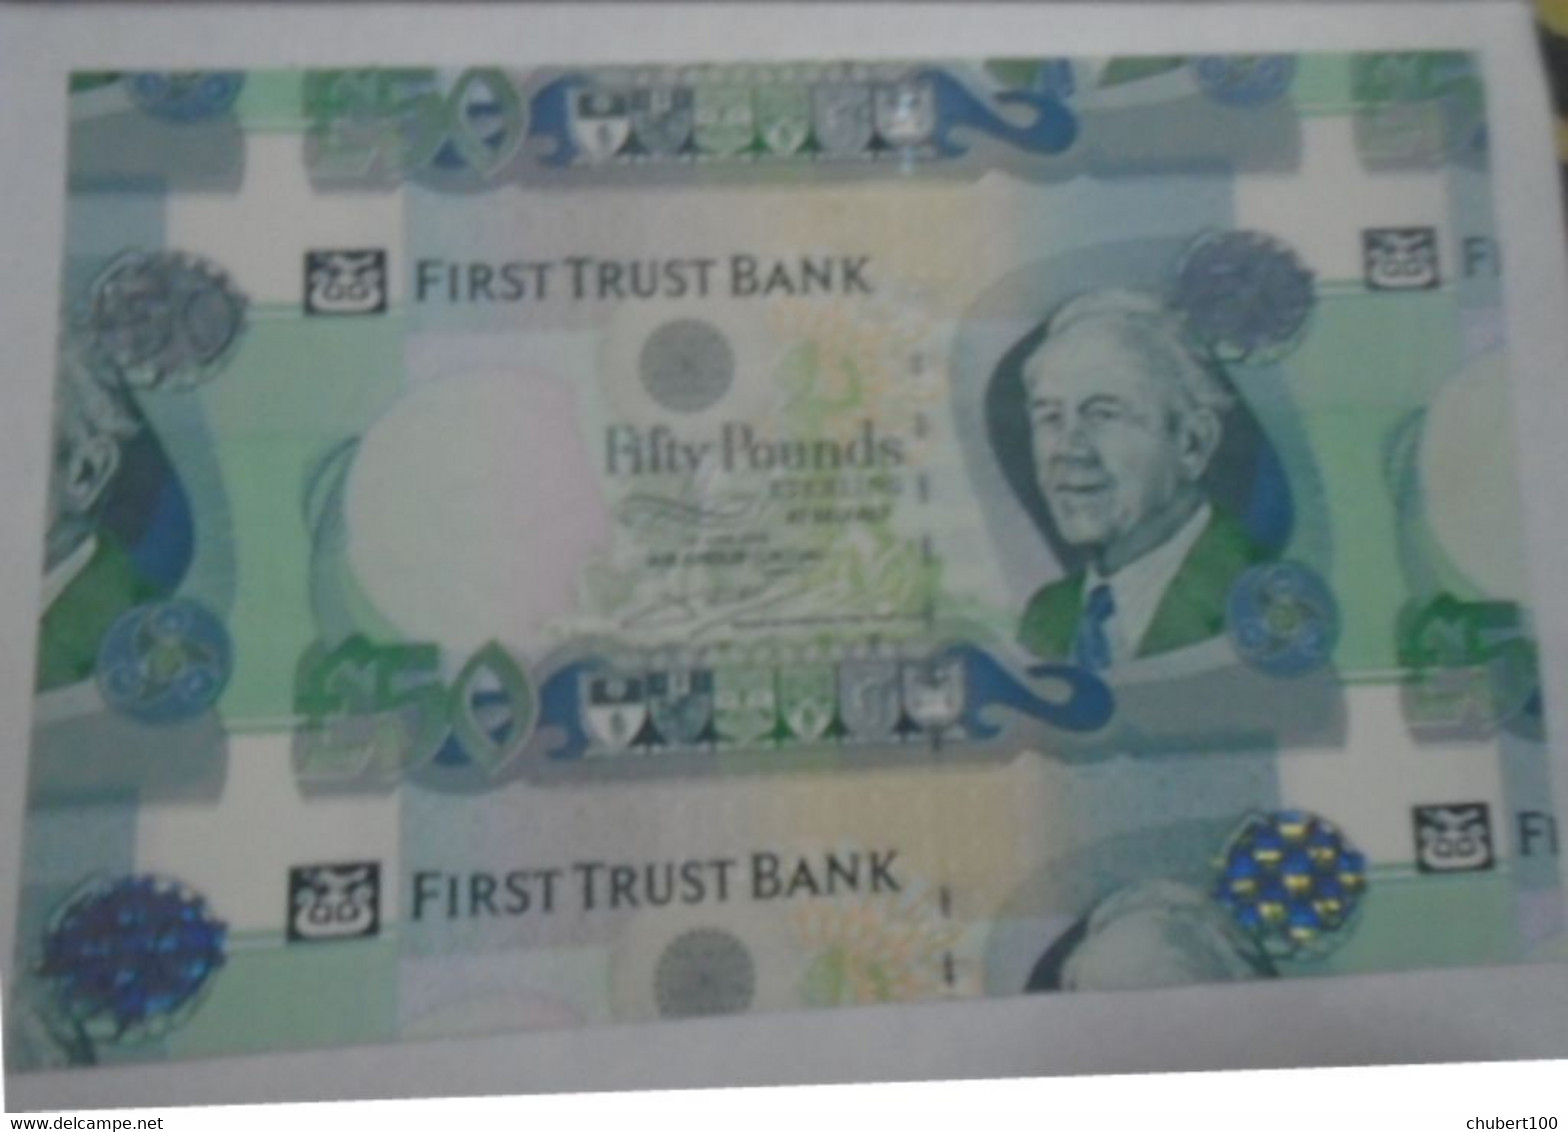 IRELAND NORTHERN,   First Trust Bank,  P 138b  Extra Large SPECIMEN £50, 2009,  AU-UNC , 30% Discount - 50 Pounds